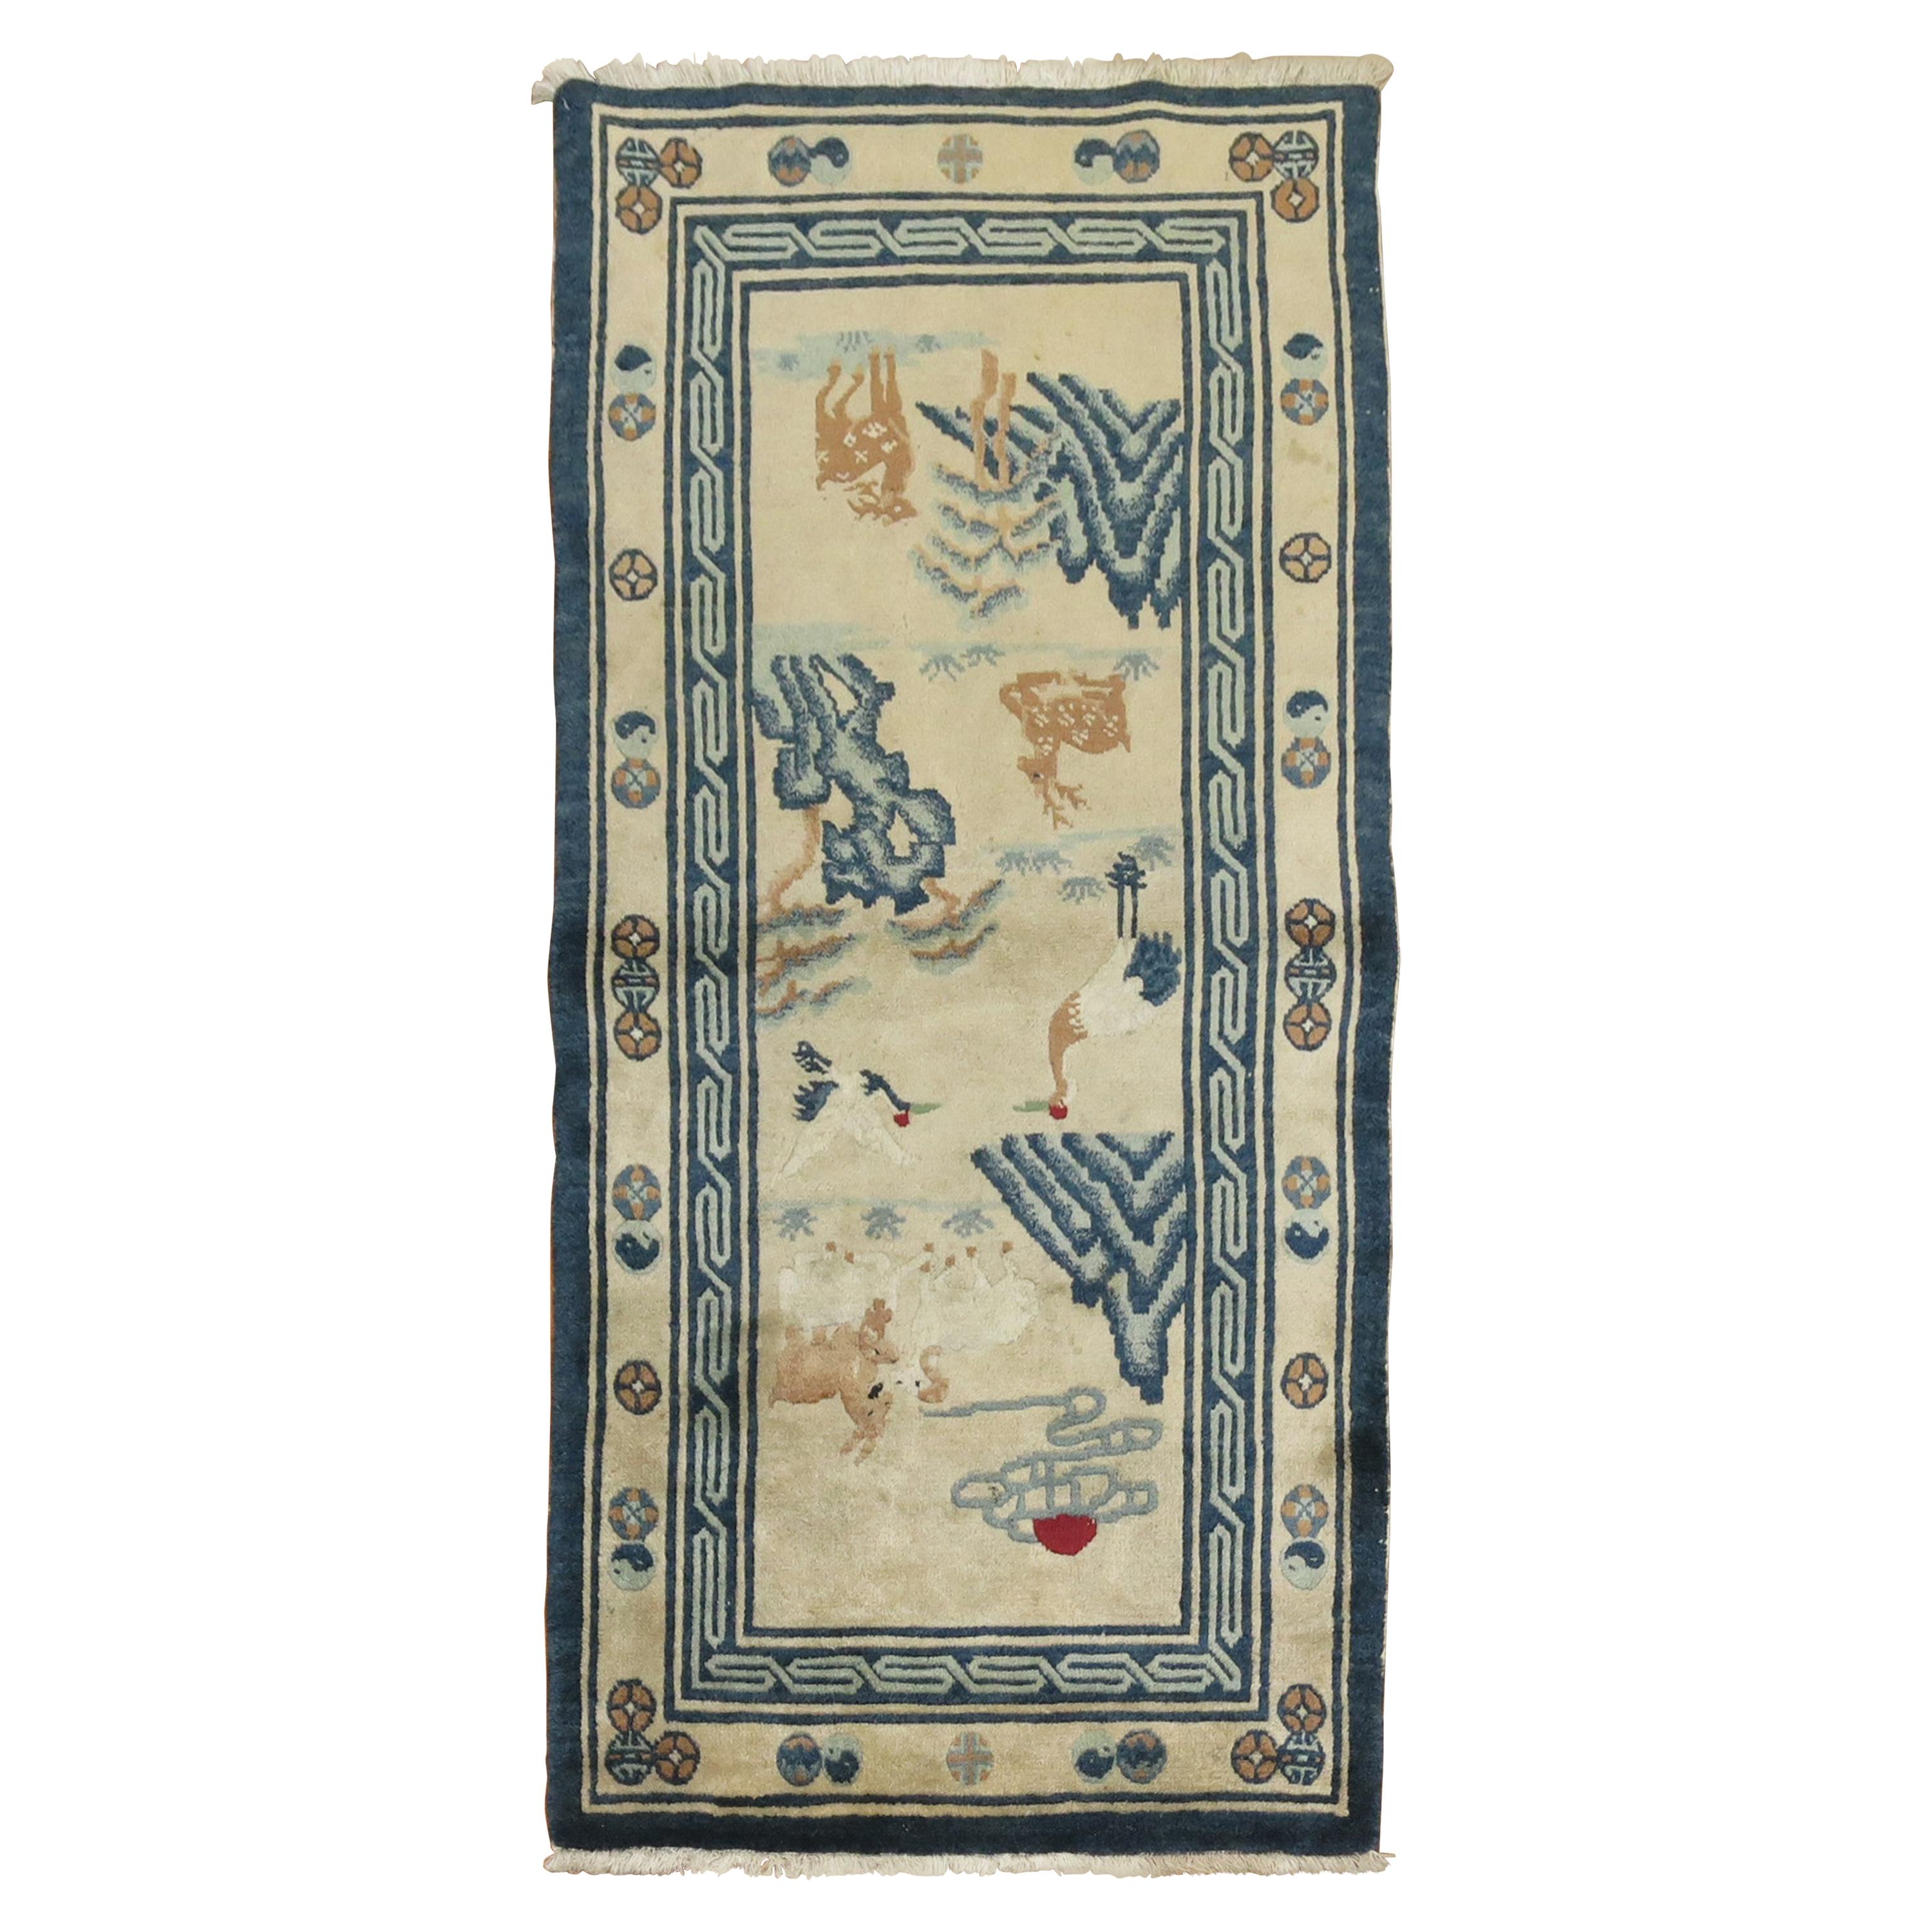 Pictorial Animal Chinese Scatter Size Early 20th Century Rug